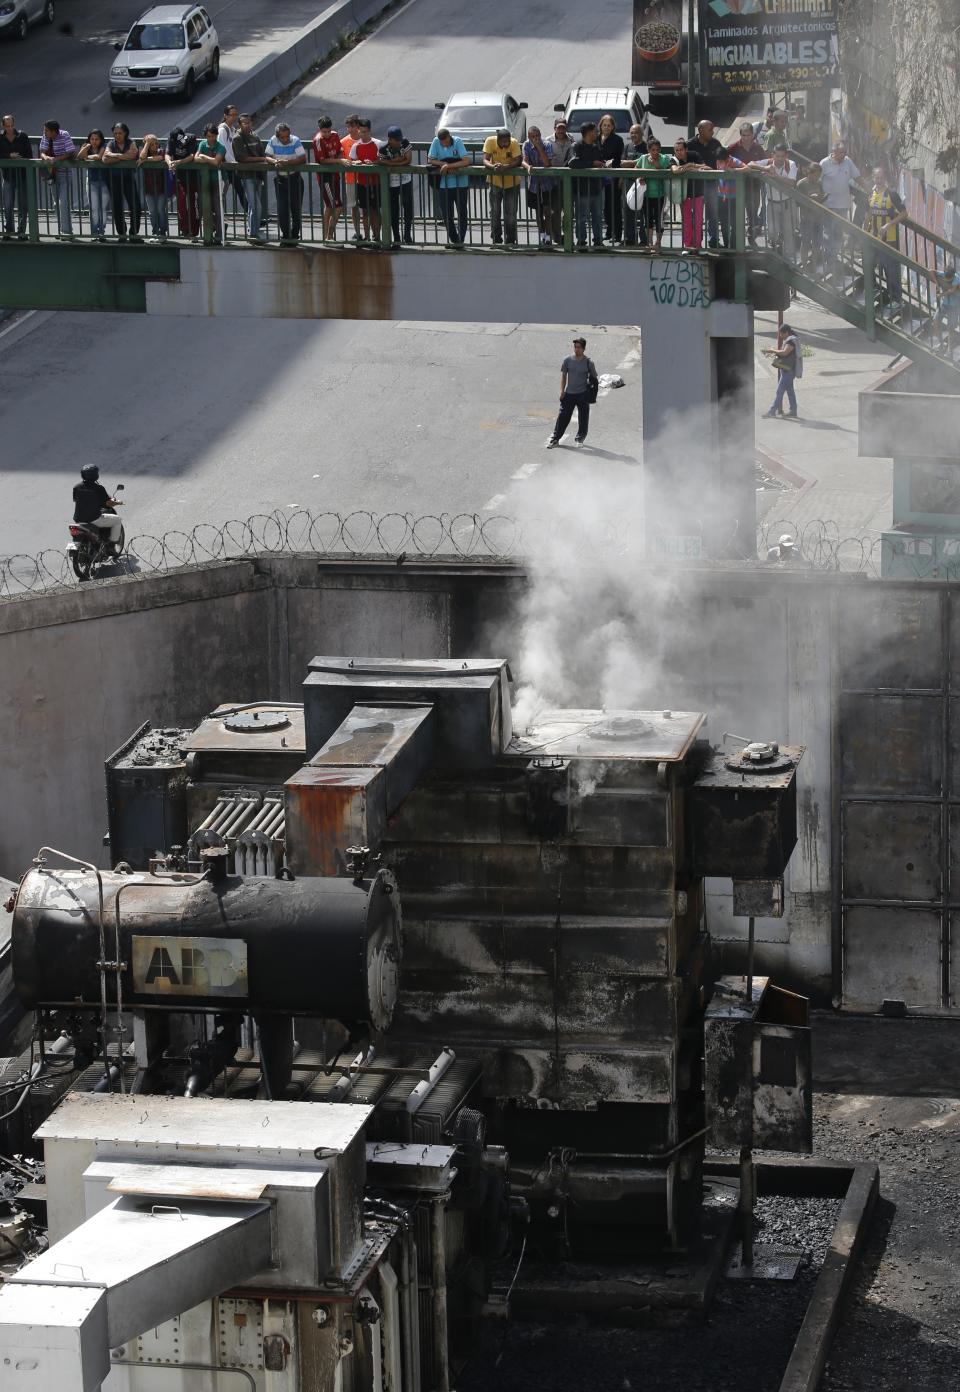 Pedestrians look down at smoldering transformers and electrical equipment at electrical substation in the Baruta area of Caracas, Venezuela, Monday, March 11, 2019. An explosion rocked the power station early Monday, witnesses said, adding to the crisis created by days of nationwide power cuts. (AP Photo/Ariana Cubillos)